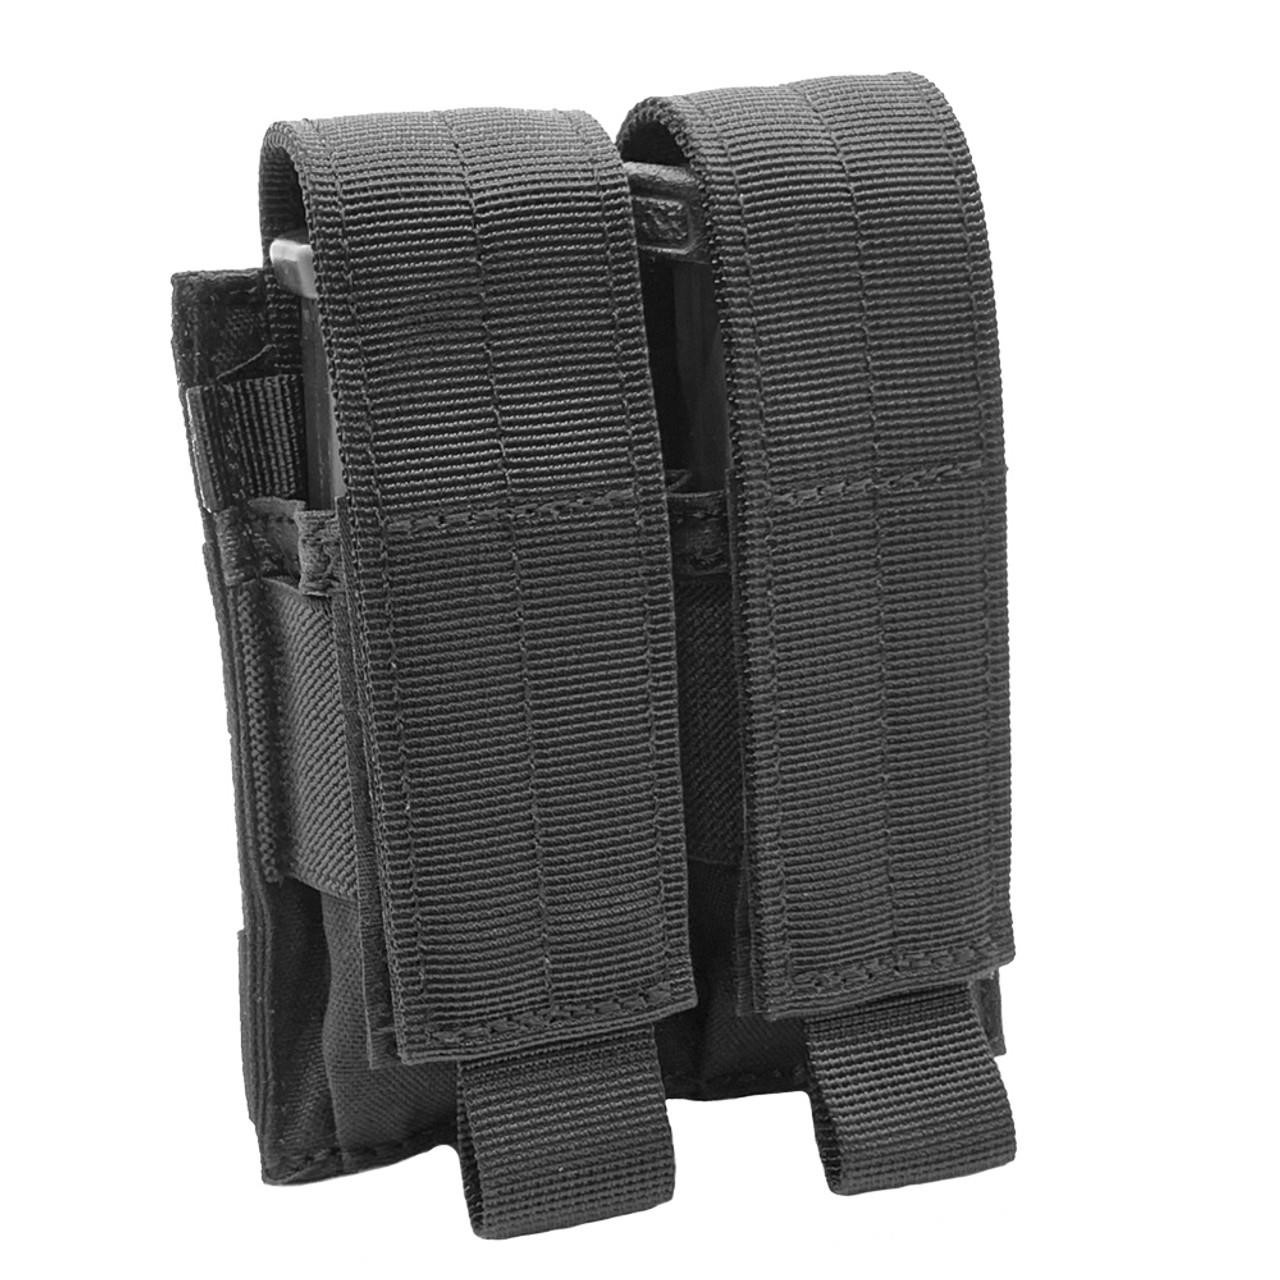 Shellback Tactical Double Pistol Mag Pouch | Tactical Gear